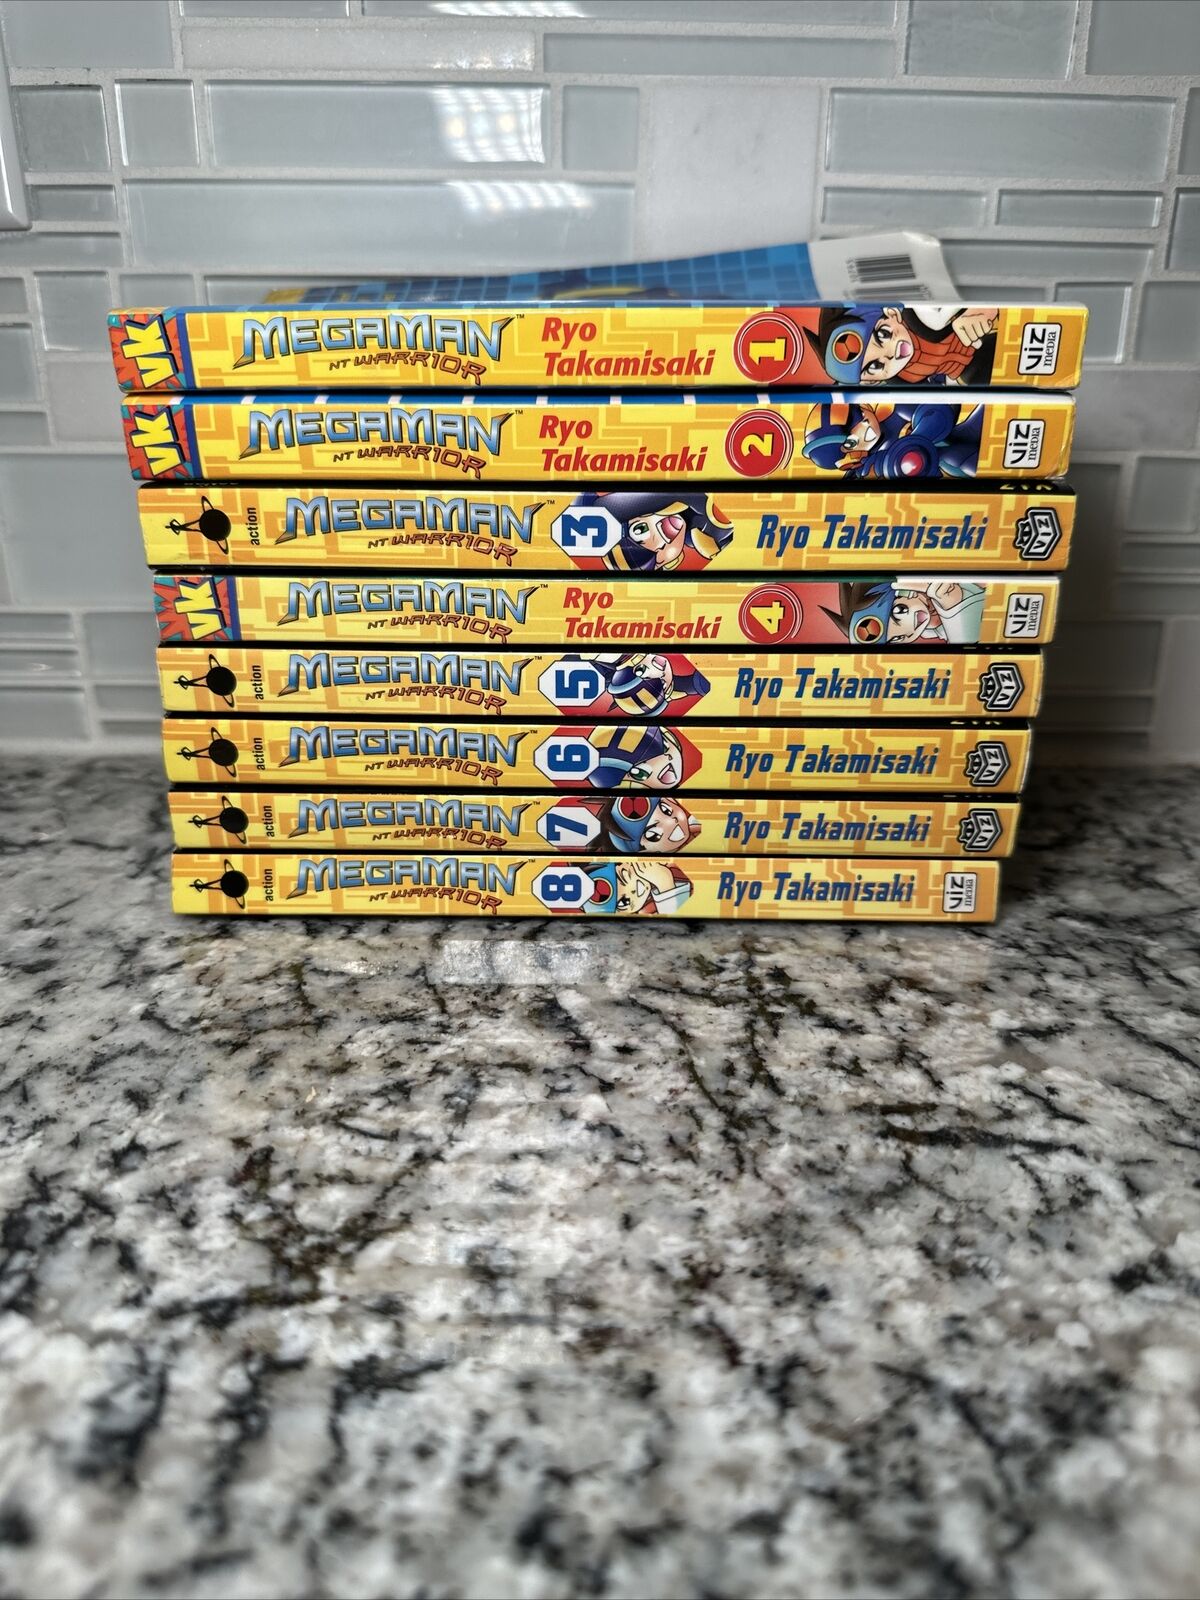 Megaman NT Warrior Volumes #1 - 8 (Mixed Editions - Volume 5-8 First Prints)